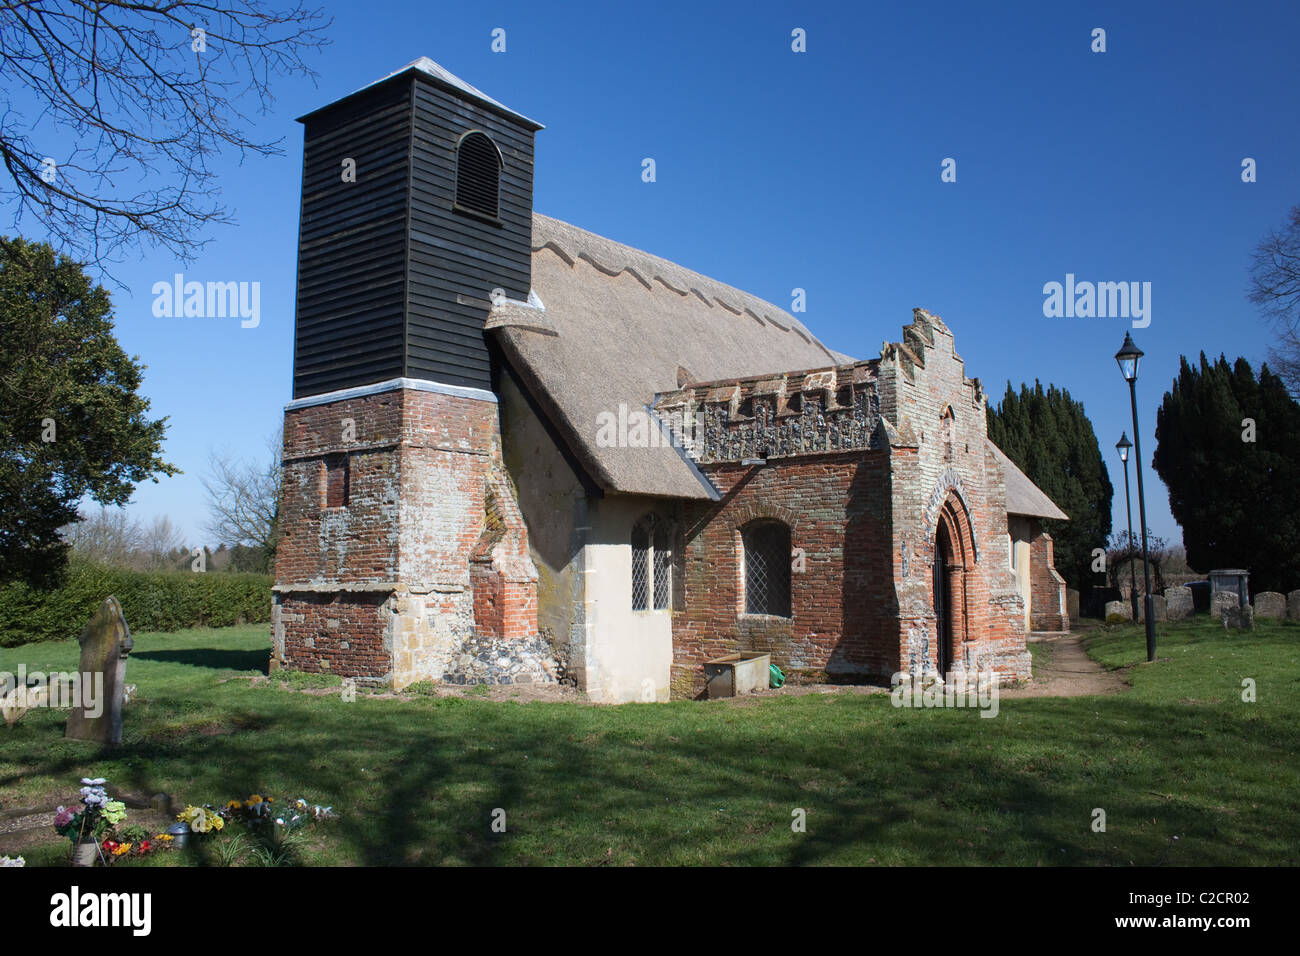 The old thatched church at Ixworth Thorpe in West Suffolk, England Stock Photo